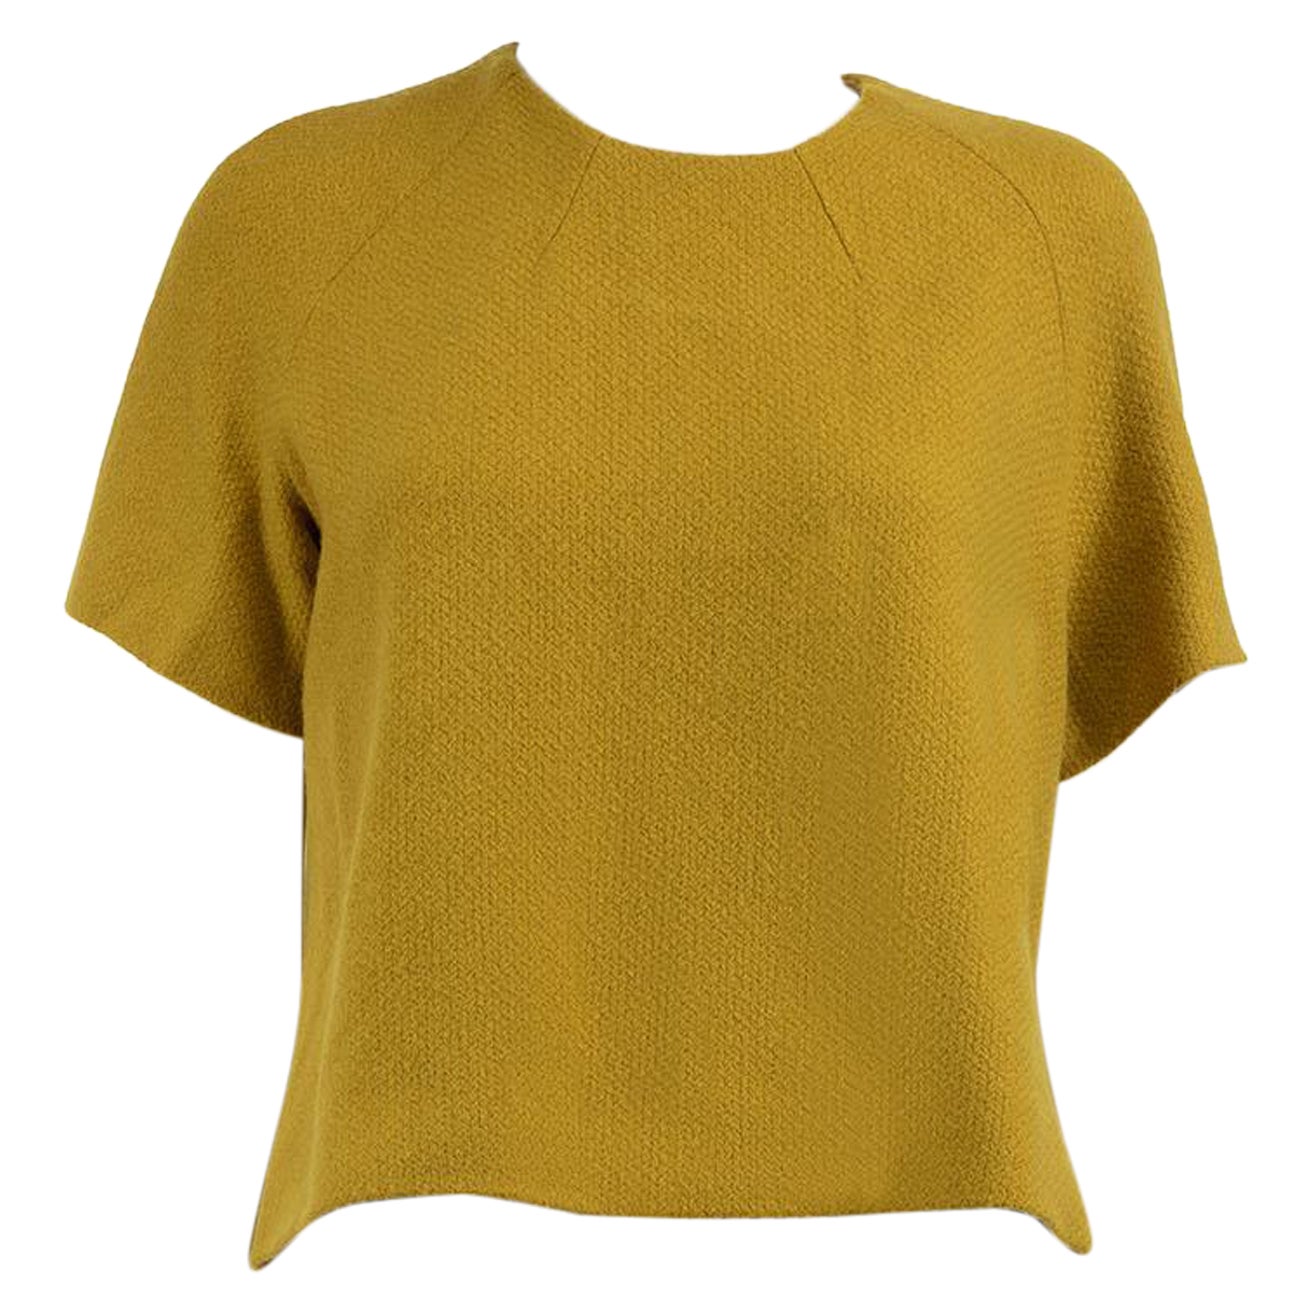 Emilia Wickstead Green Wool Round Neck Top Size M For Sale